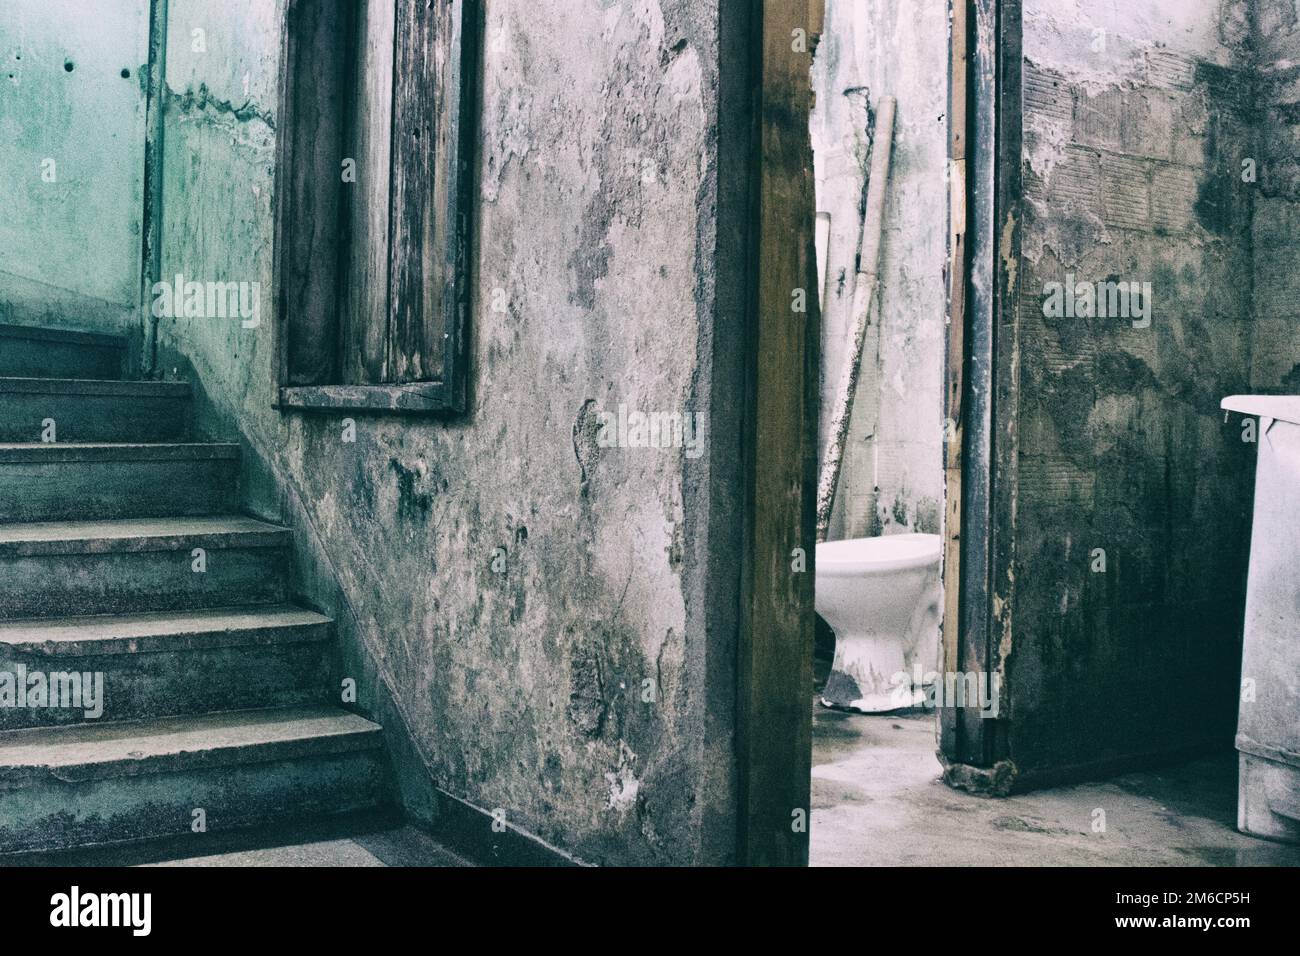 Cracked bathroom near a decayed staircase in condemned building. Stock Photo